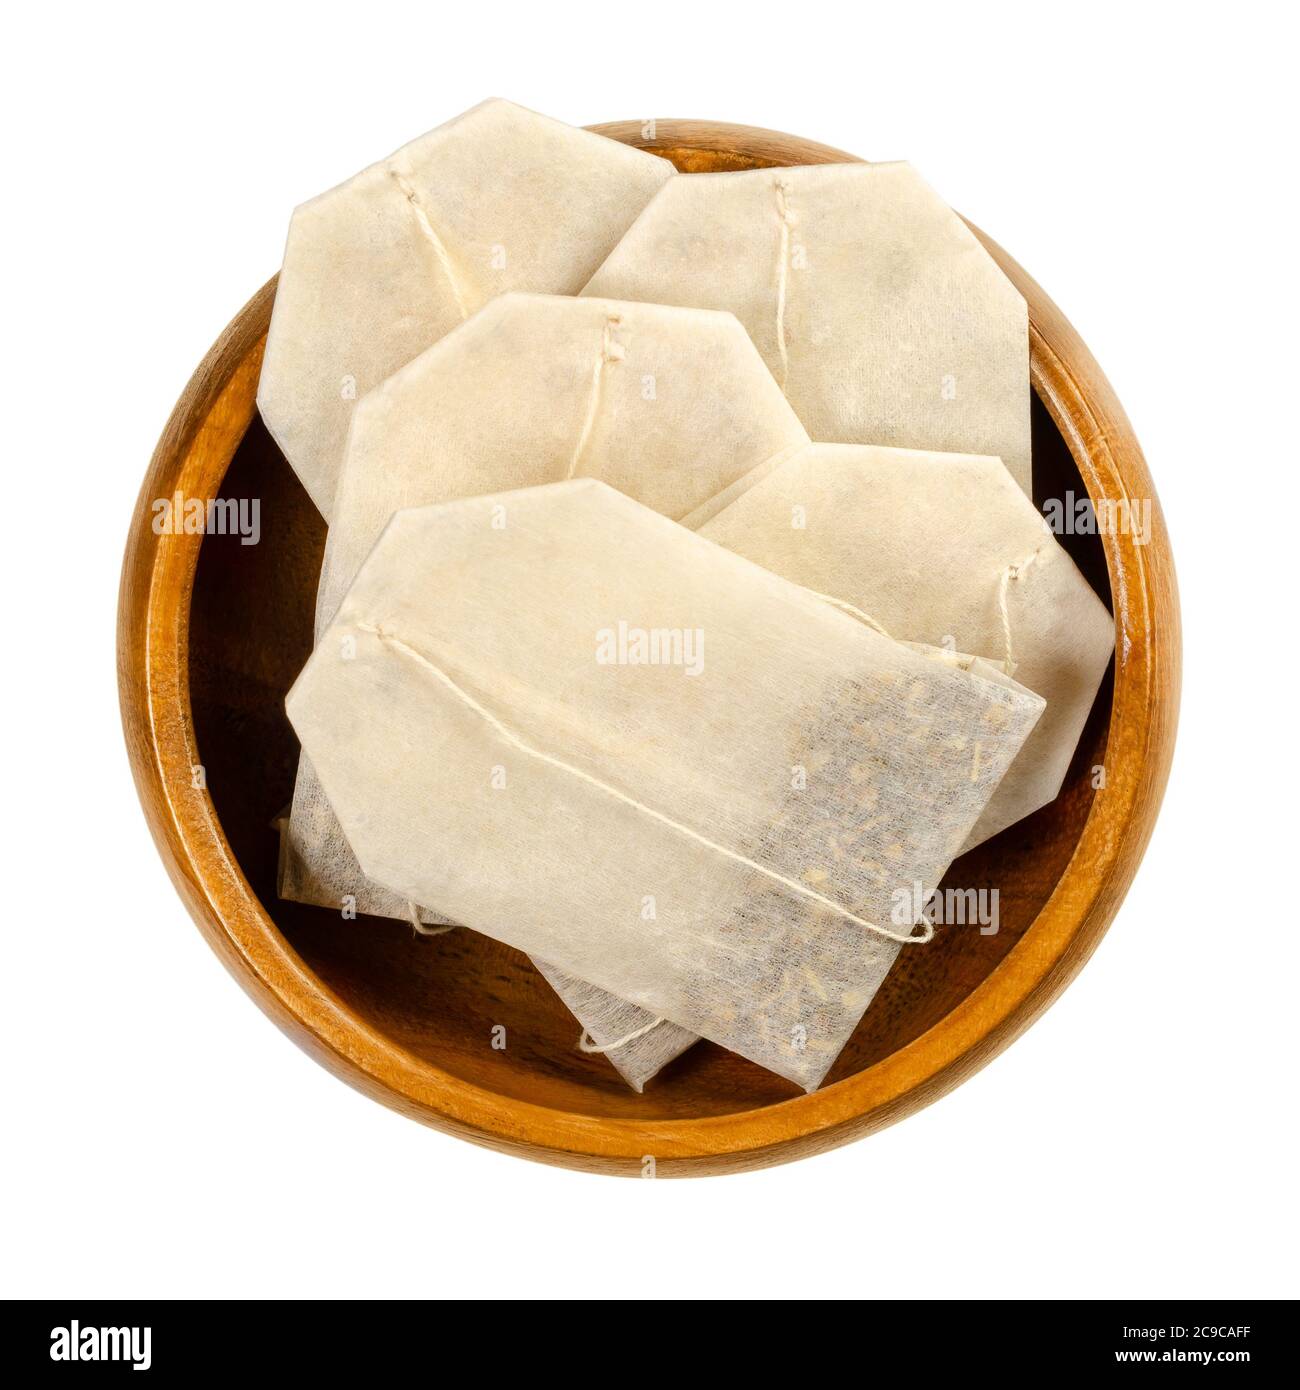 Tea bags in wooden bowl. Small, porous, sealed bag, made of filter paper, with string, containing shredded tea, to put into water and make an infusion. Stock Photo